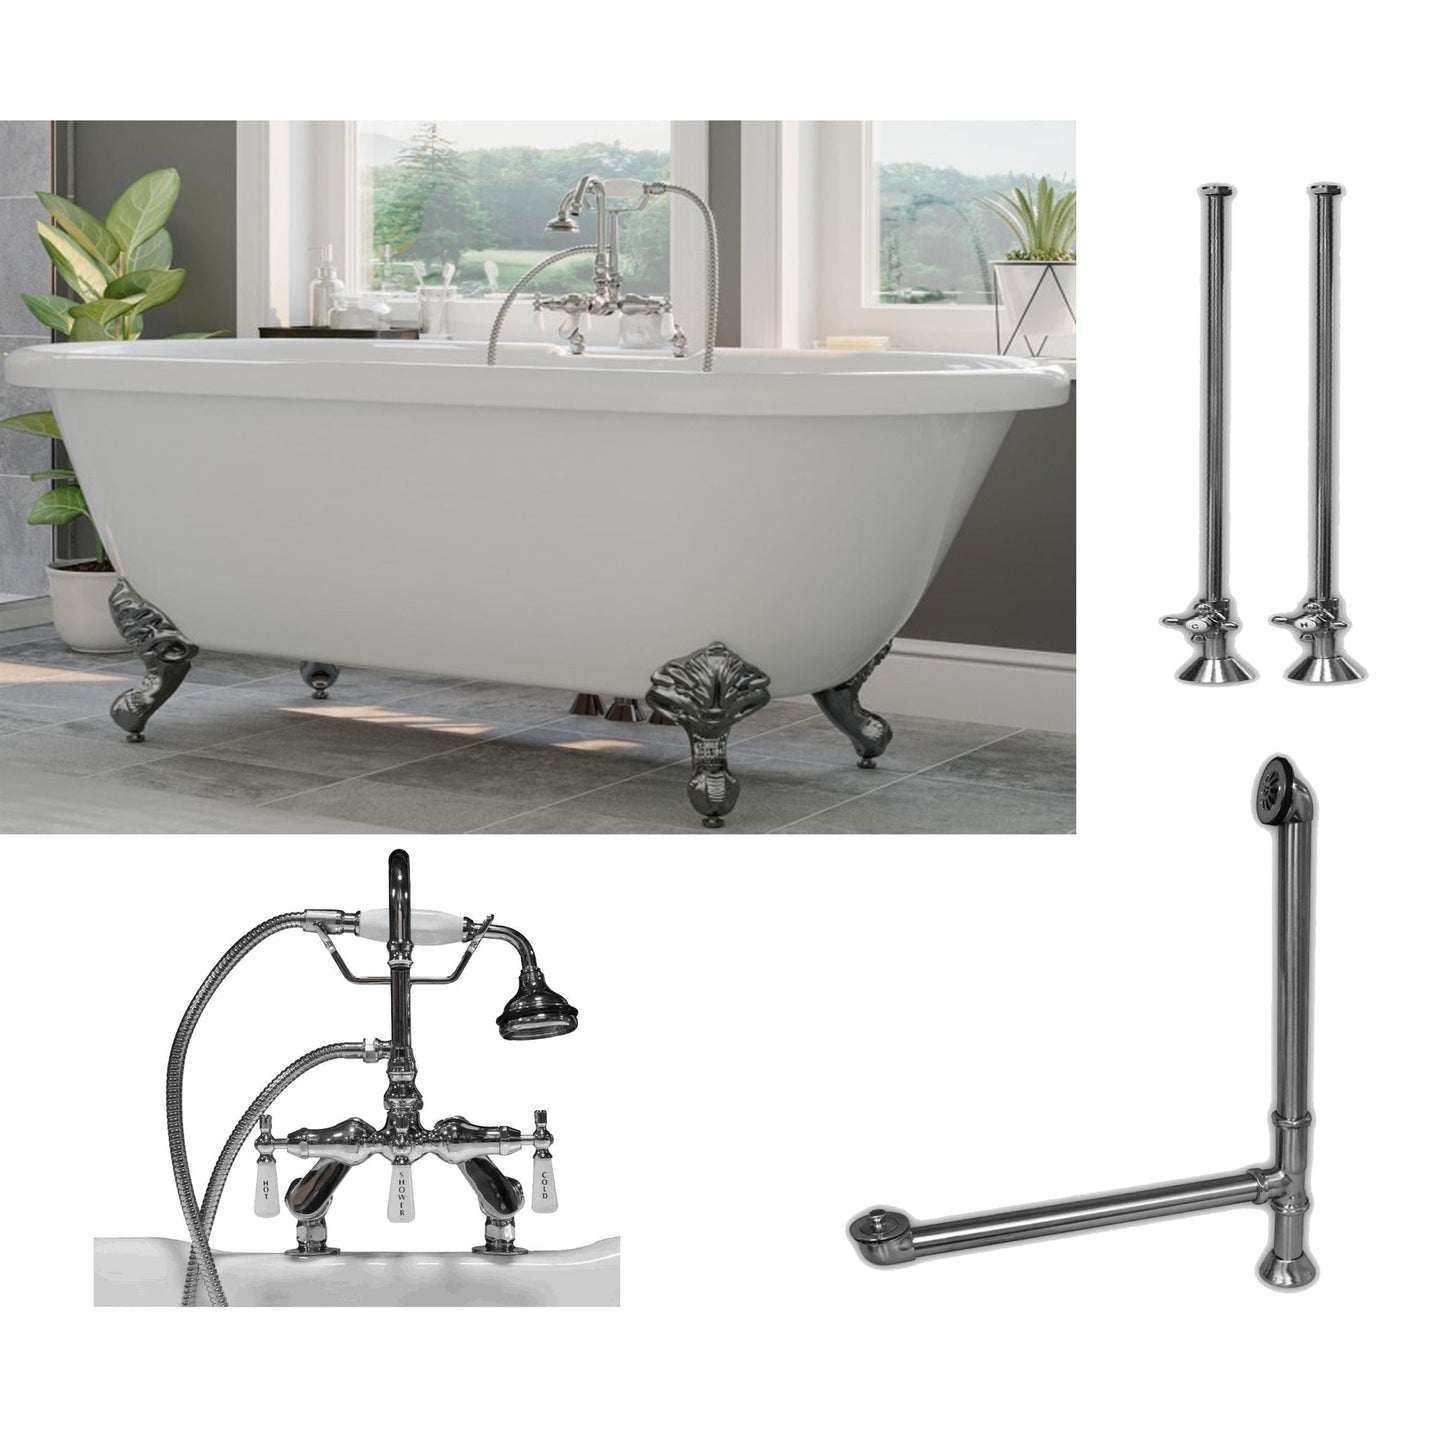 Cambridge Plumbing 60" White Acrylic Double Ended Clawfoot Bathtub With Deck Holes And Complete Plumbing Package Including Porcelain Lever English Telephone Brass Faucet, Supply Lines, Drain And Overflow Assembly In Polished Chrome